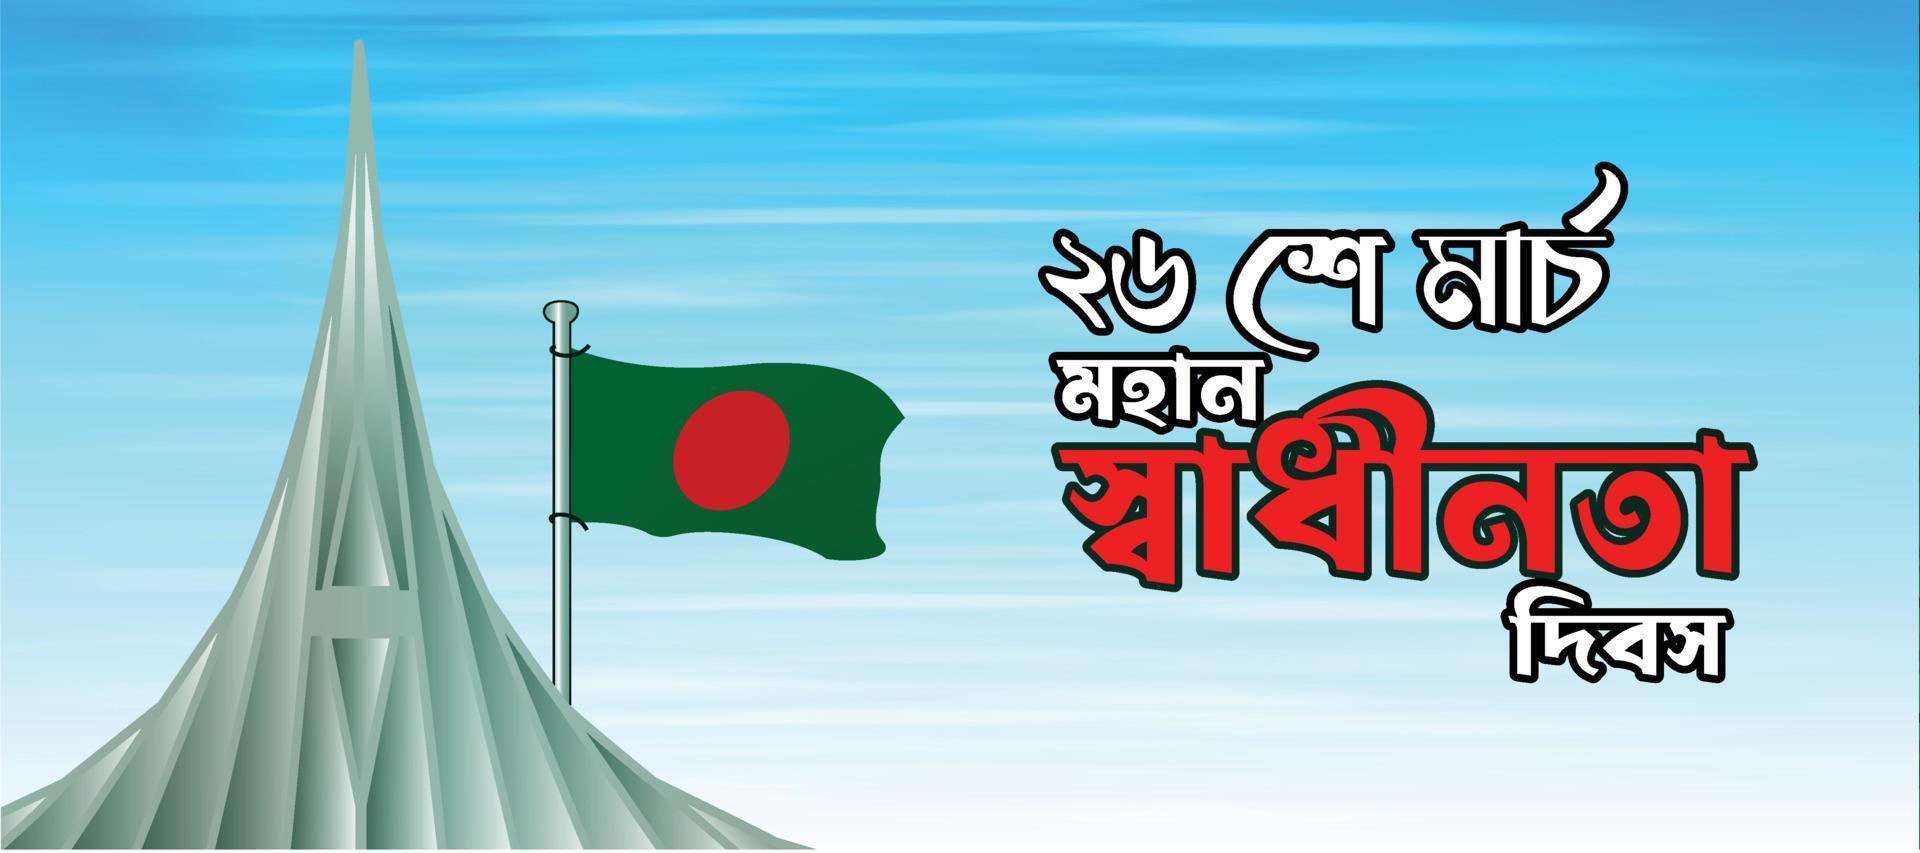 happy independence day of bangladesh typography with vector illustration, 26 March Happy Independence Day with Bangladesh flag national monument with Bangladesh background.